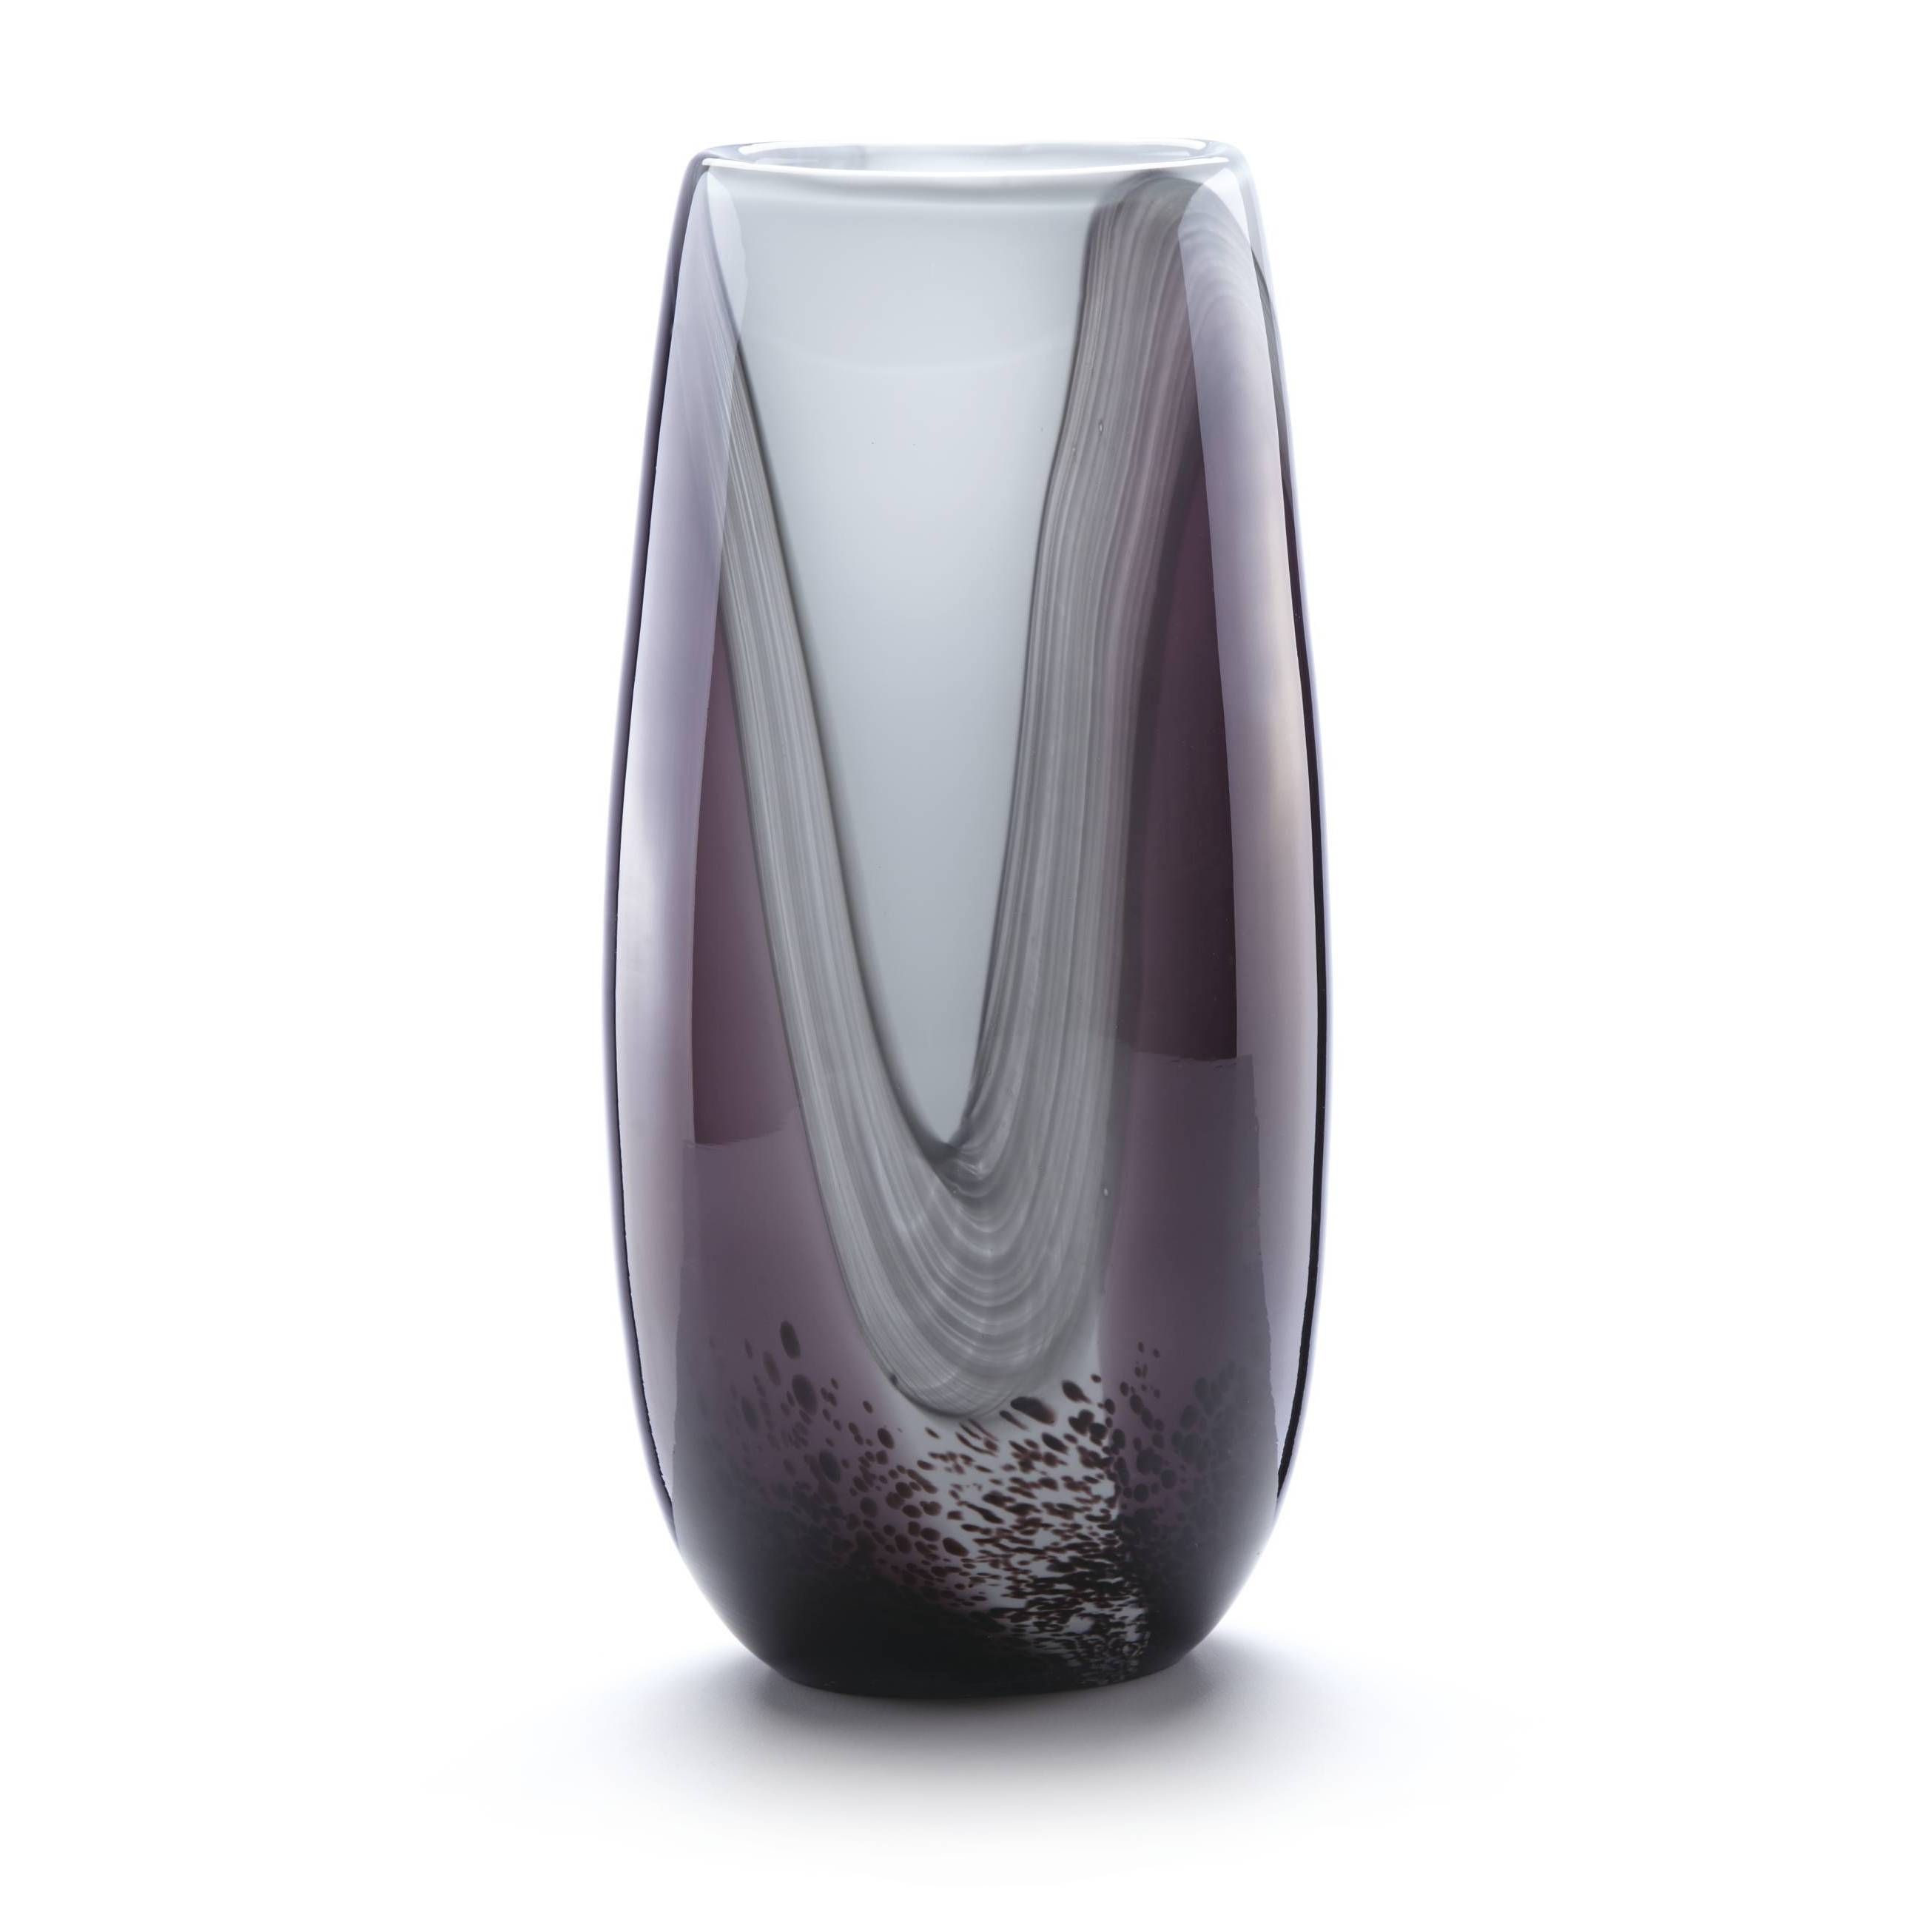 19 Fabulous Purple Swirl Vase 2023 free download purple swirl vase of lenox novia purple crystal 11 inch large vase outlet store and with regard to lenox novia purple crystal 11 inch large vase novia grey size